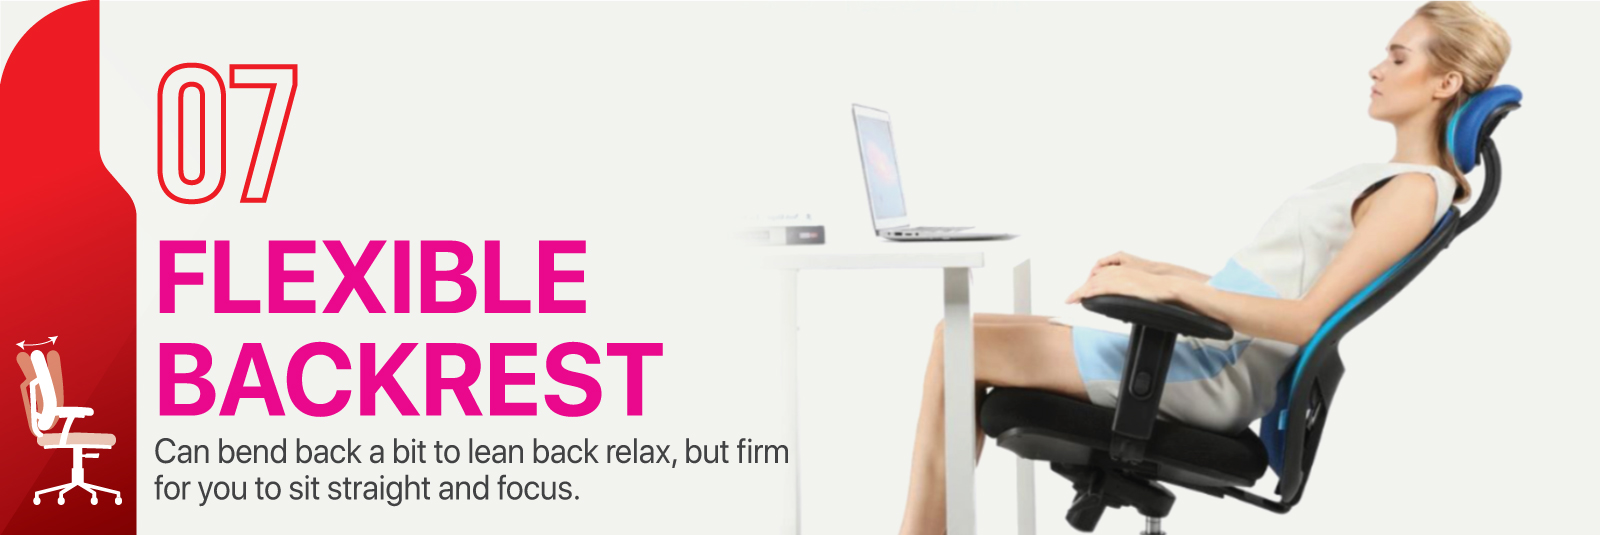 Flexible Backrest - Can bend back a bot to lean back relax. but firm for you to sit straight and focus.